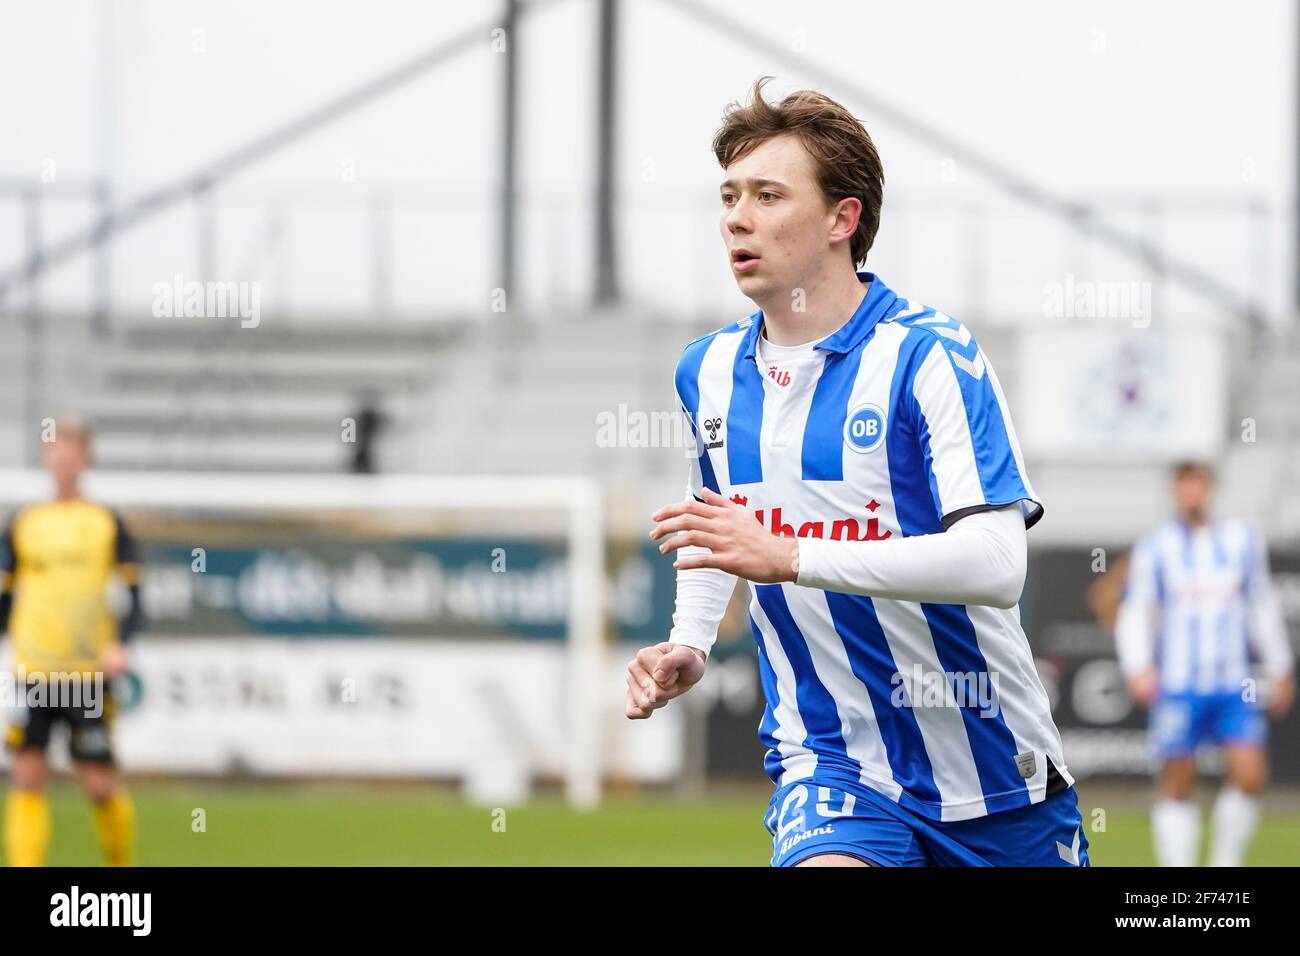 Horsens, Denmark. 04th Apr, 2021. Mads Frokjaer-Jensen of OB seen during  the 3F Superliga match between AC Horsens and Odense Boldklub at Casa Arena  in Horsens. (Photo Credit: Gonzales Photo/Alamy Live News